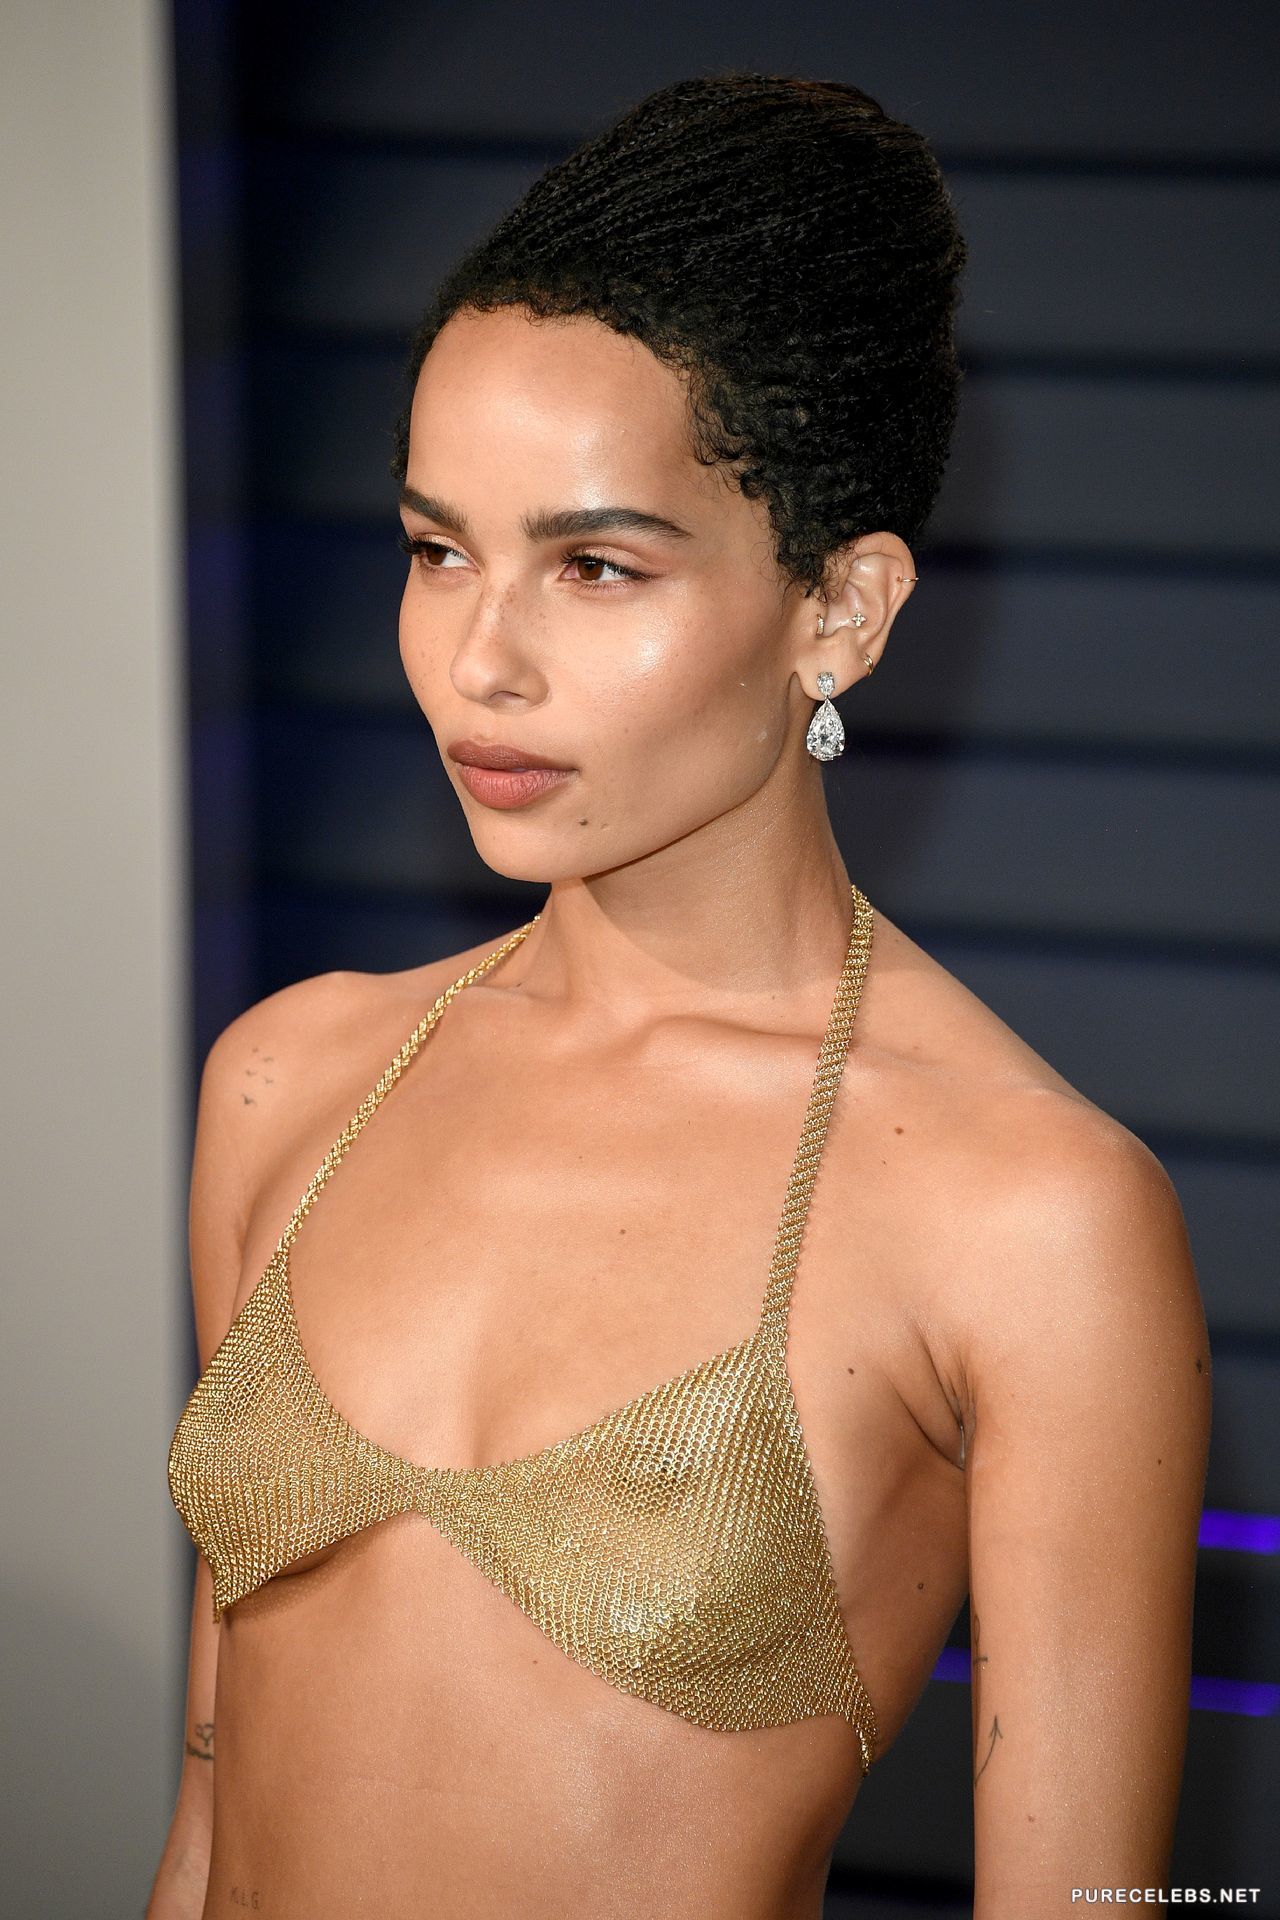 Leaked zoe kravitz tits revealed in hot transparent top